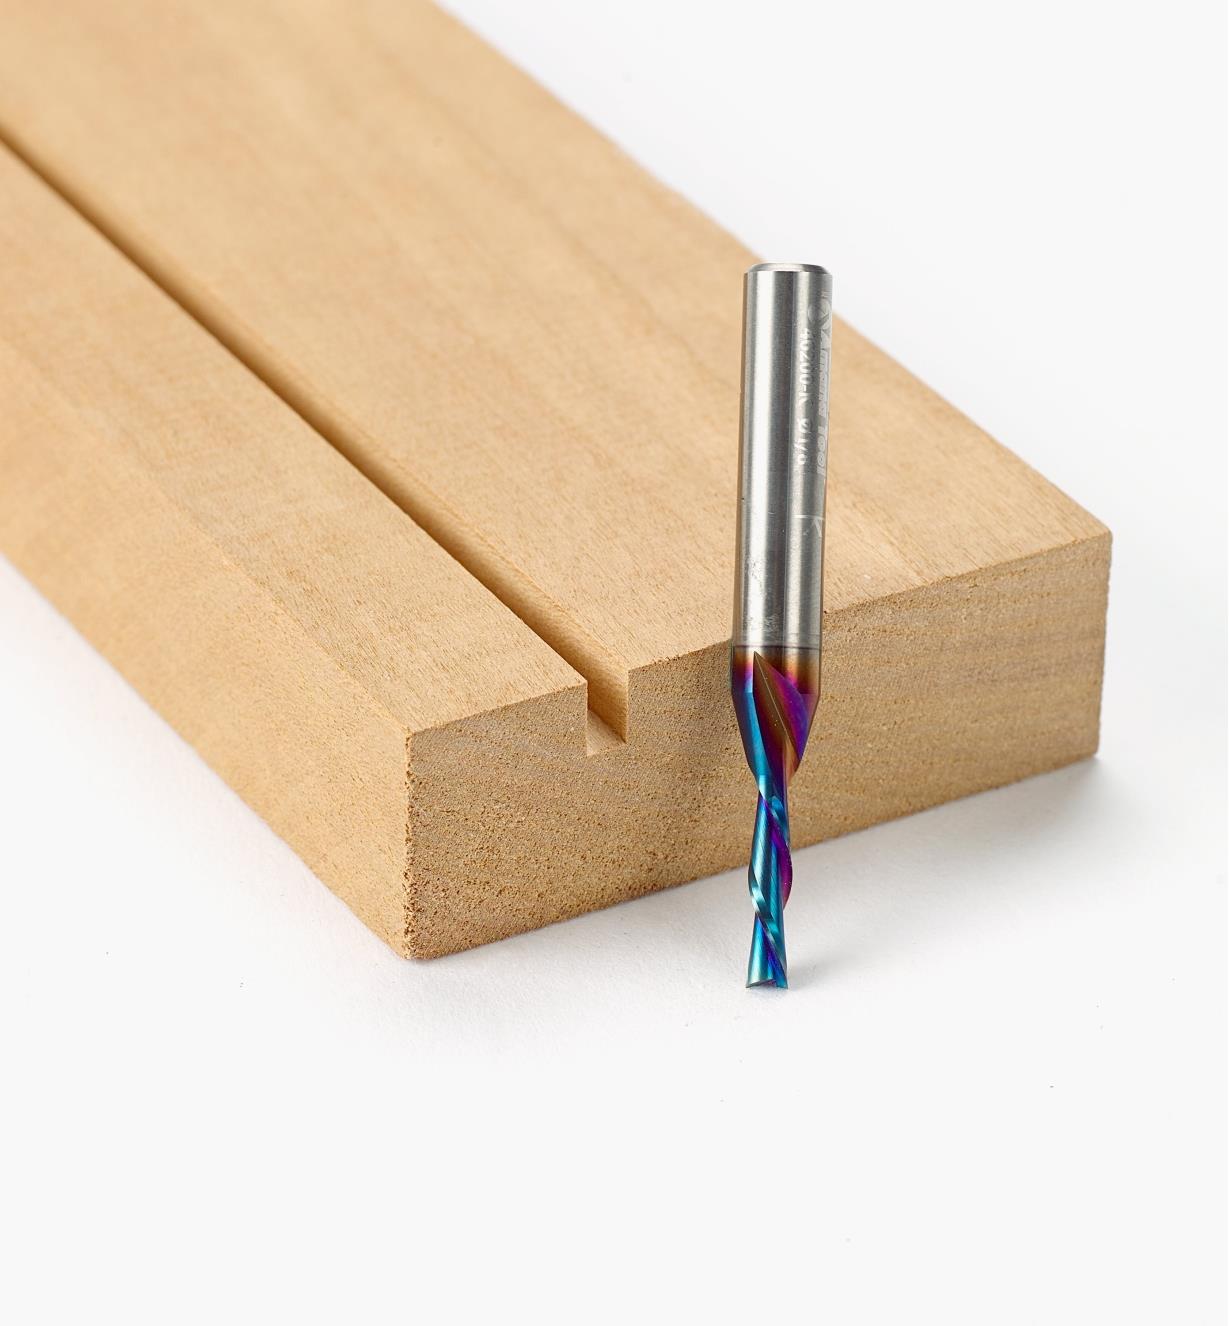 A 1/8 inch diameter downcut bit next to a board with a narrow groove cut into it